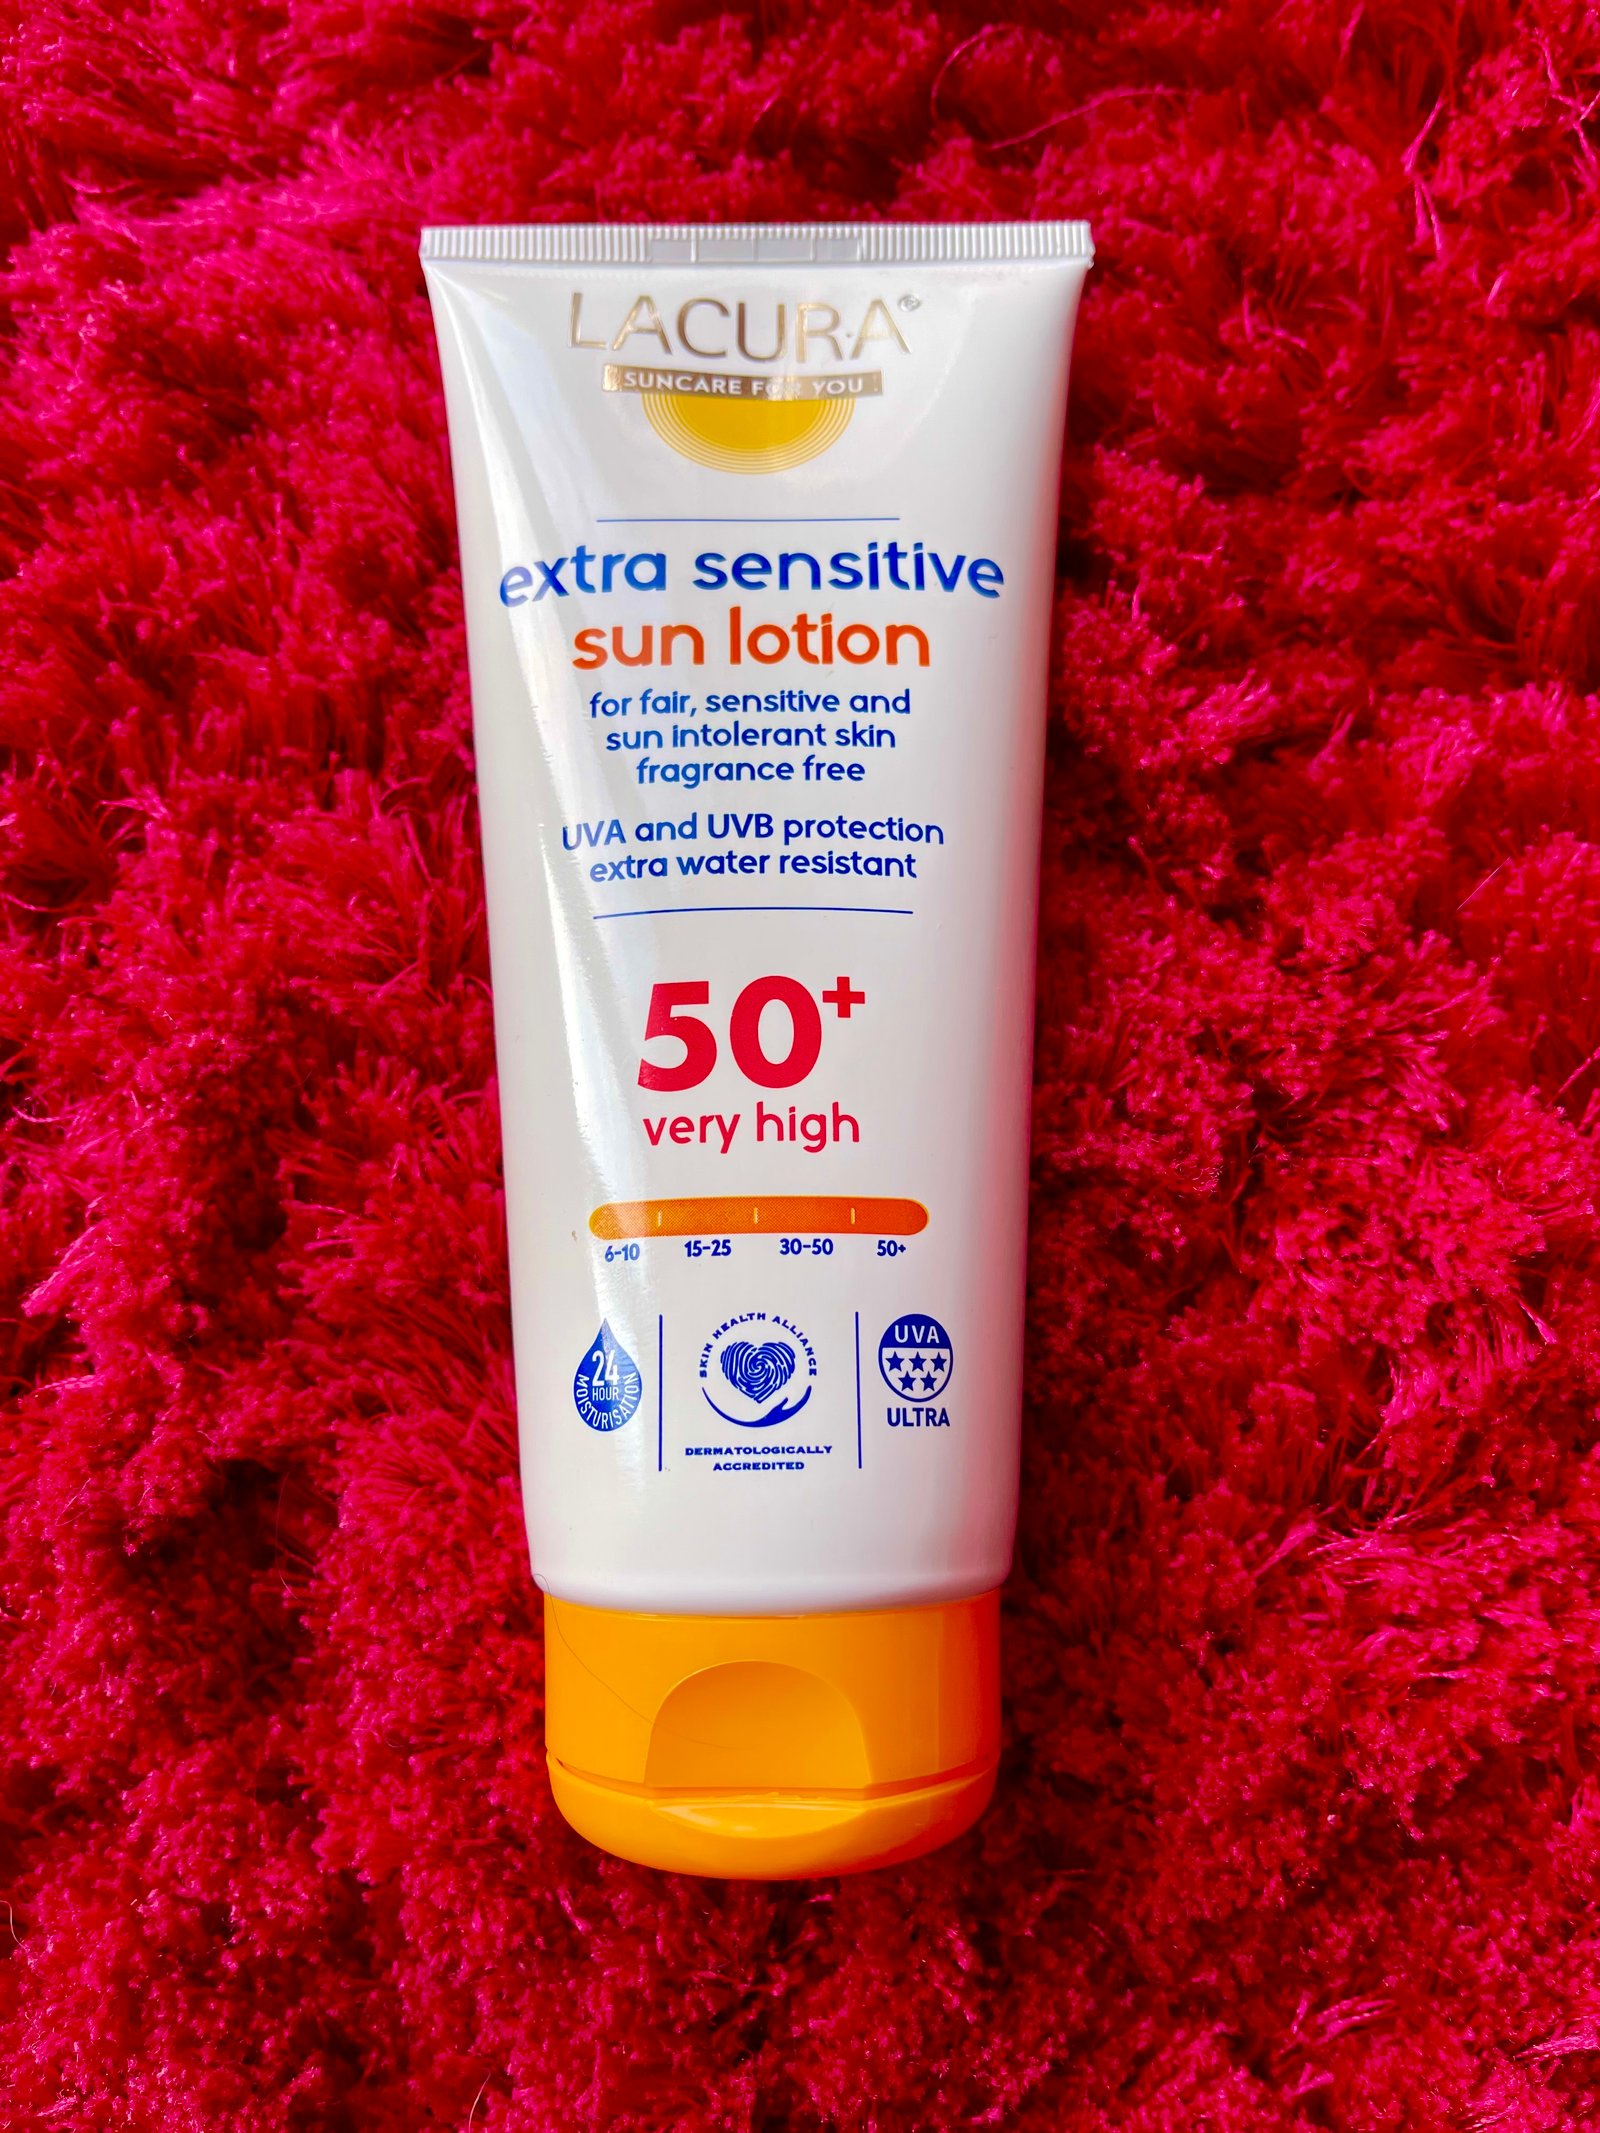 Lacura extra sensitive sun lotion suncream by Aldi on red fluffy background